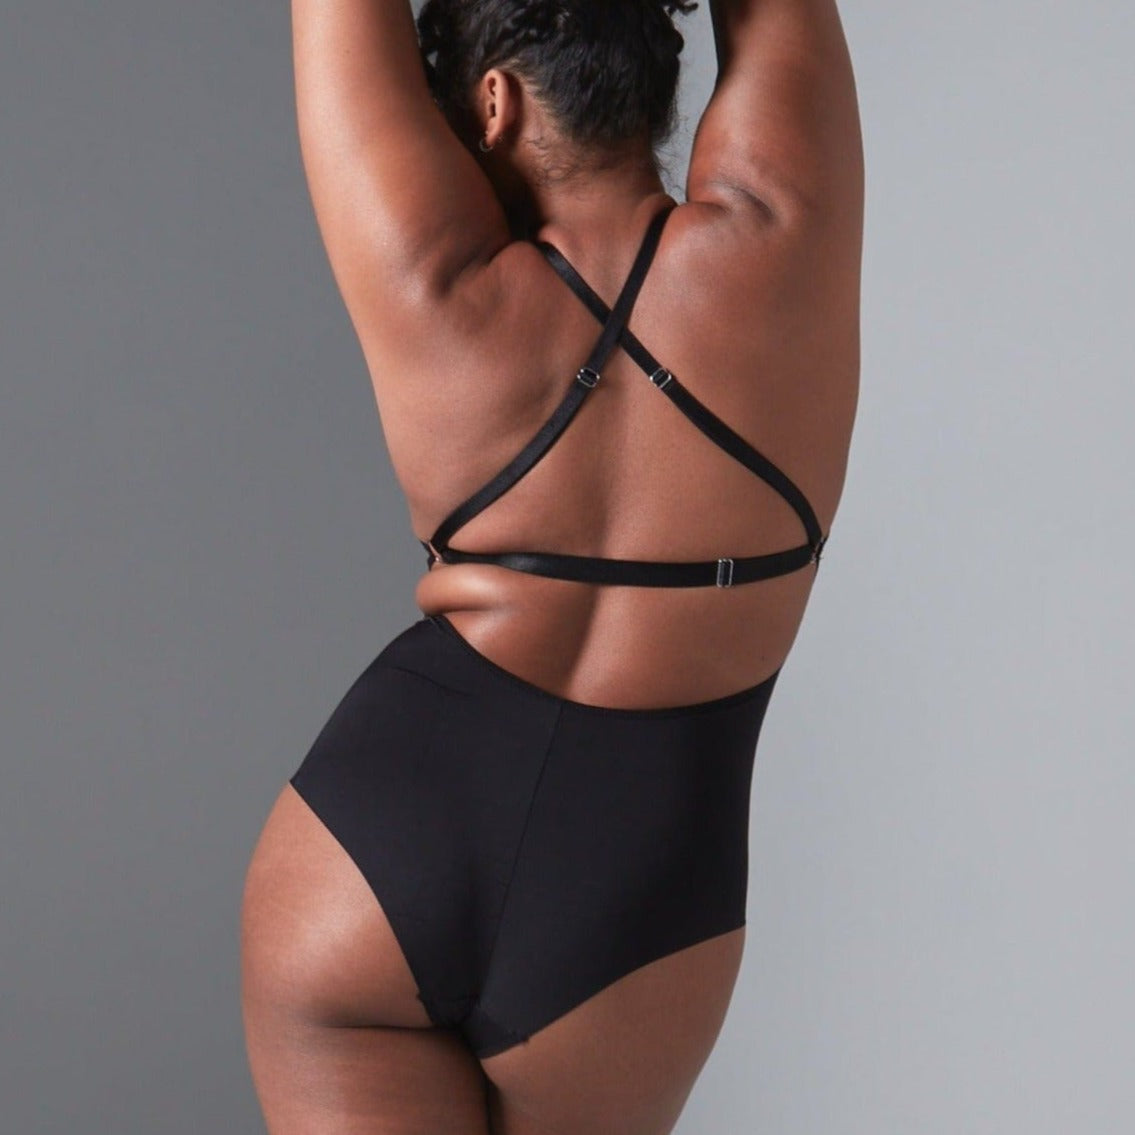 Dracona Bodysuit - Available in Multiple Nudes